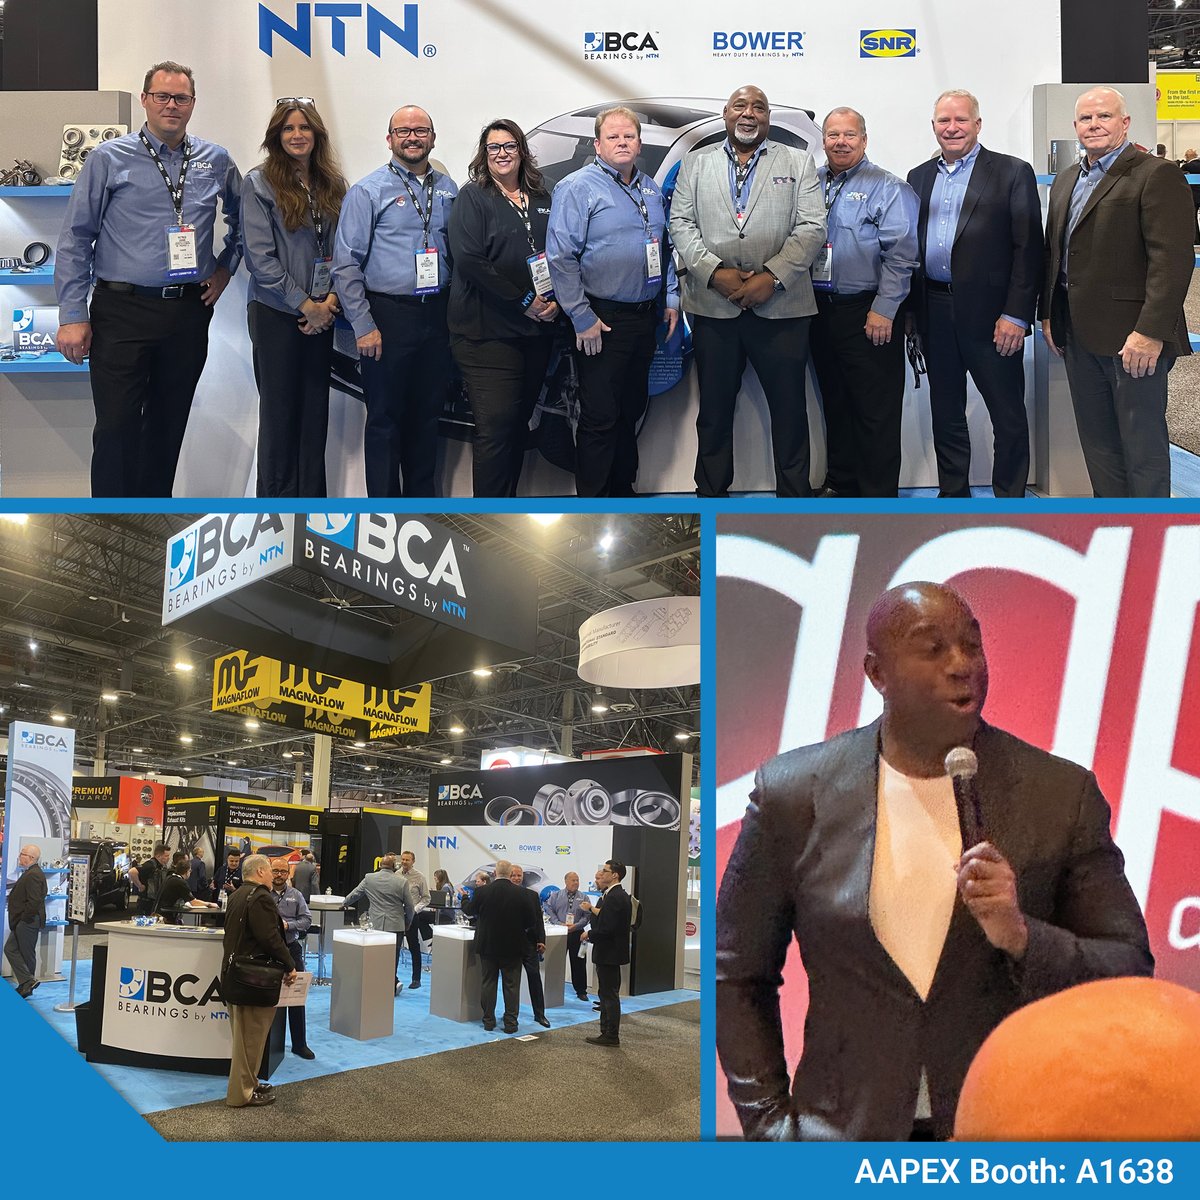 The BCA team had a great first day at #AAPEX23, and now we’re Ready for Day 2! Visit booth A1638 to learn how BCA Bearings by NTN brings OE-Quality Wheel Hubs, Bearings and Seals to the Aftermarket #OEQuality #WheelHubs #Bearings #Seals #AAPEX